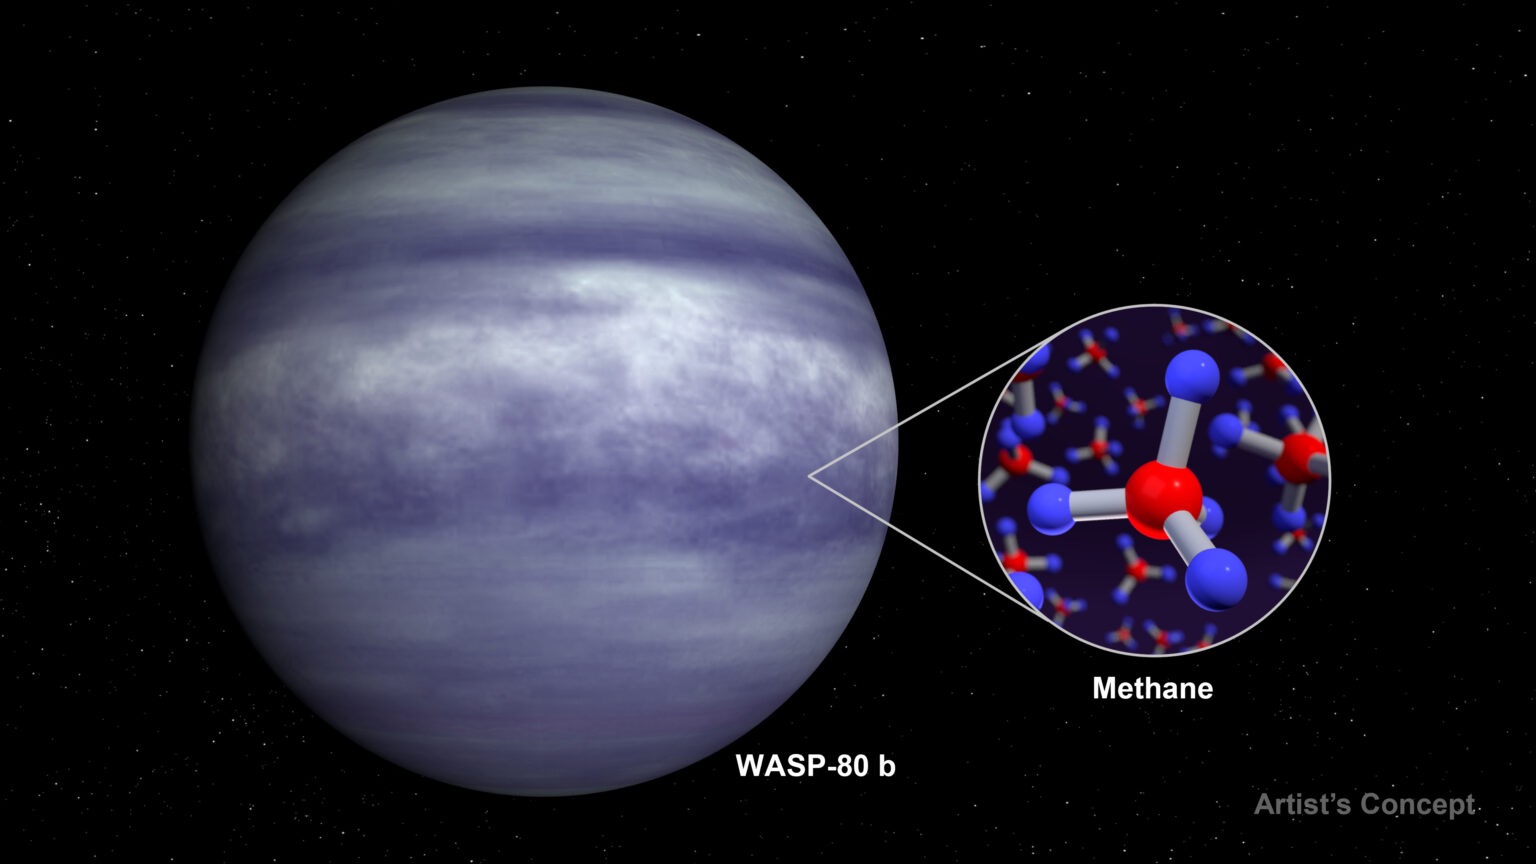 An artist’s rendering of the warm exoplanet WASP-80 b whose color may appear bluish to human eyes due to the lack of high-altitude clouds and the presence of atmospheric methane identified by NASA’s James Webb Space Telescope, similar to the planets Uranus and Neptune in our own solar system. Image credit: NASA.